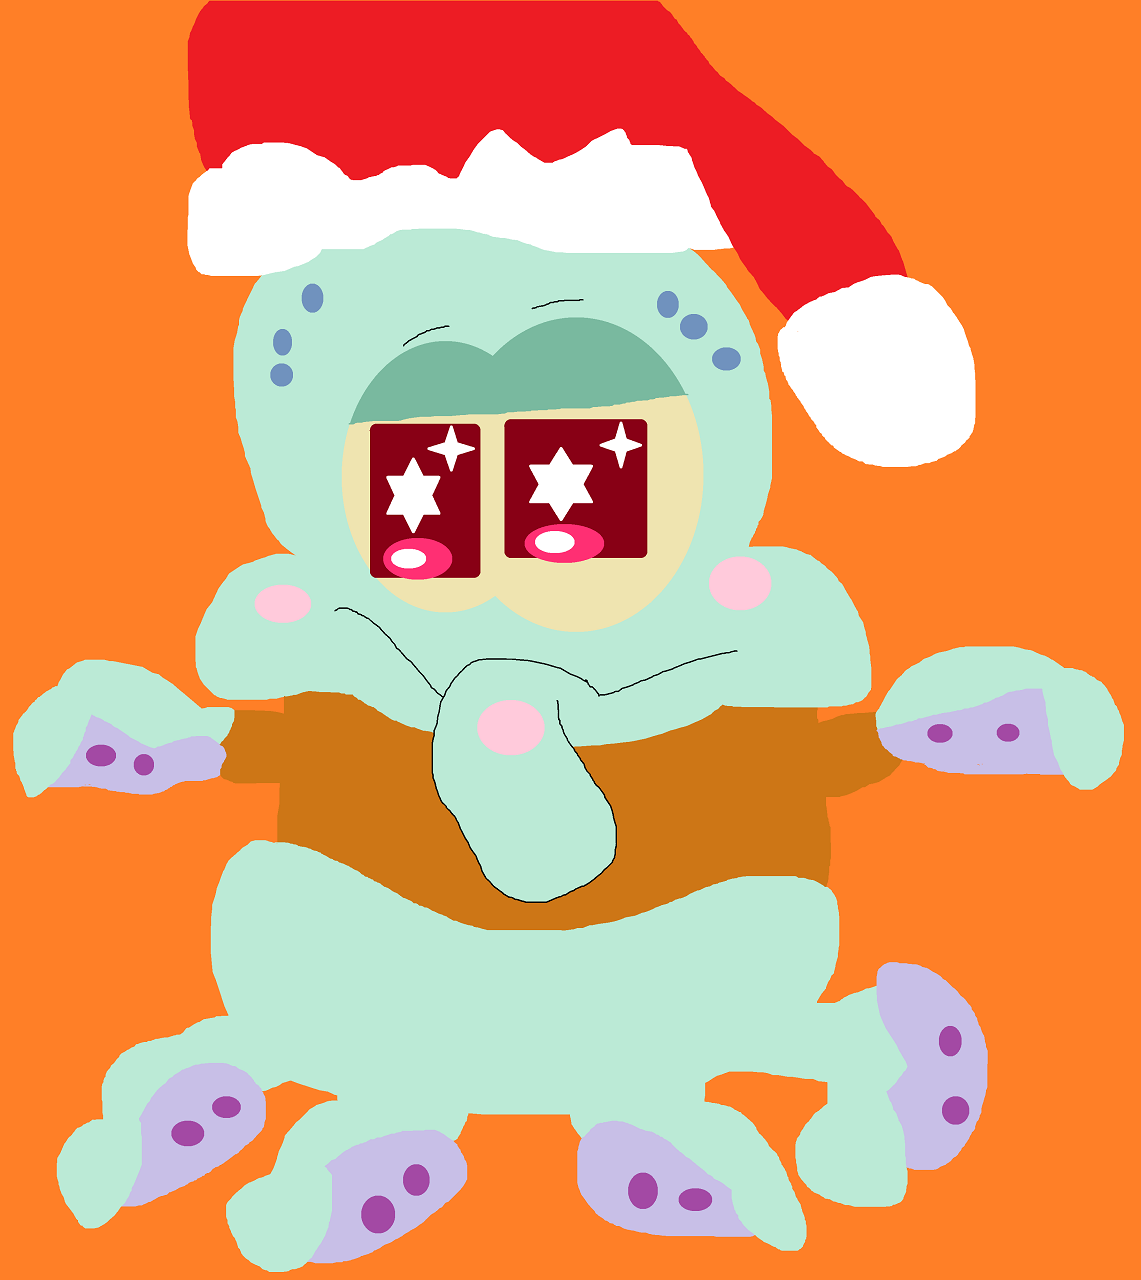 Squidward Holiday Squishable Based On My New Plush Again by Falconlobo